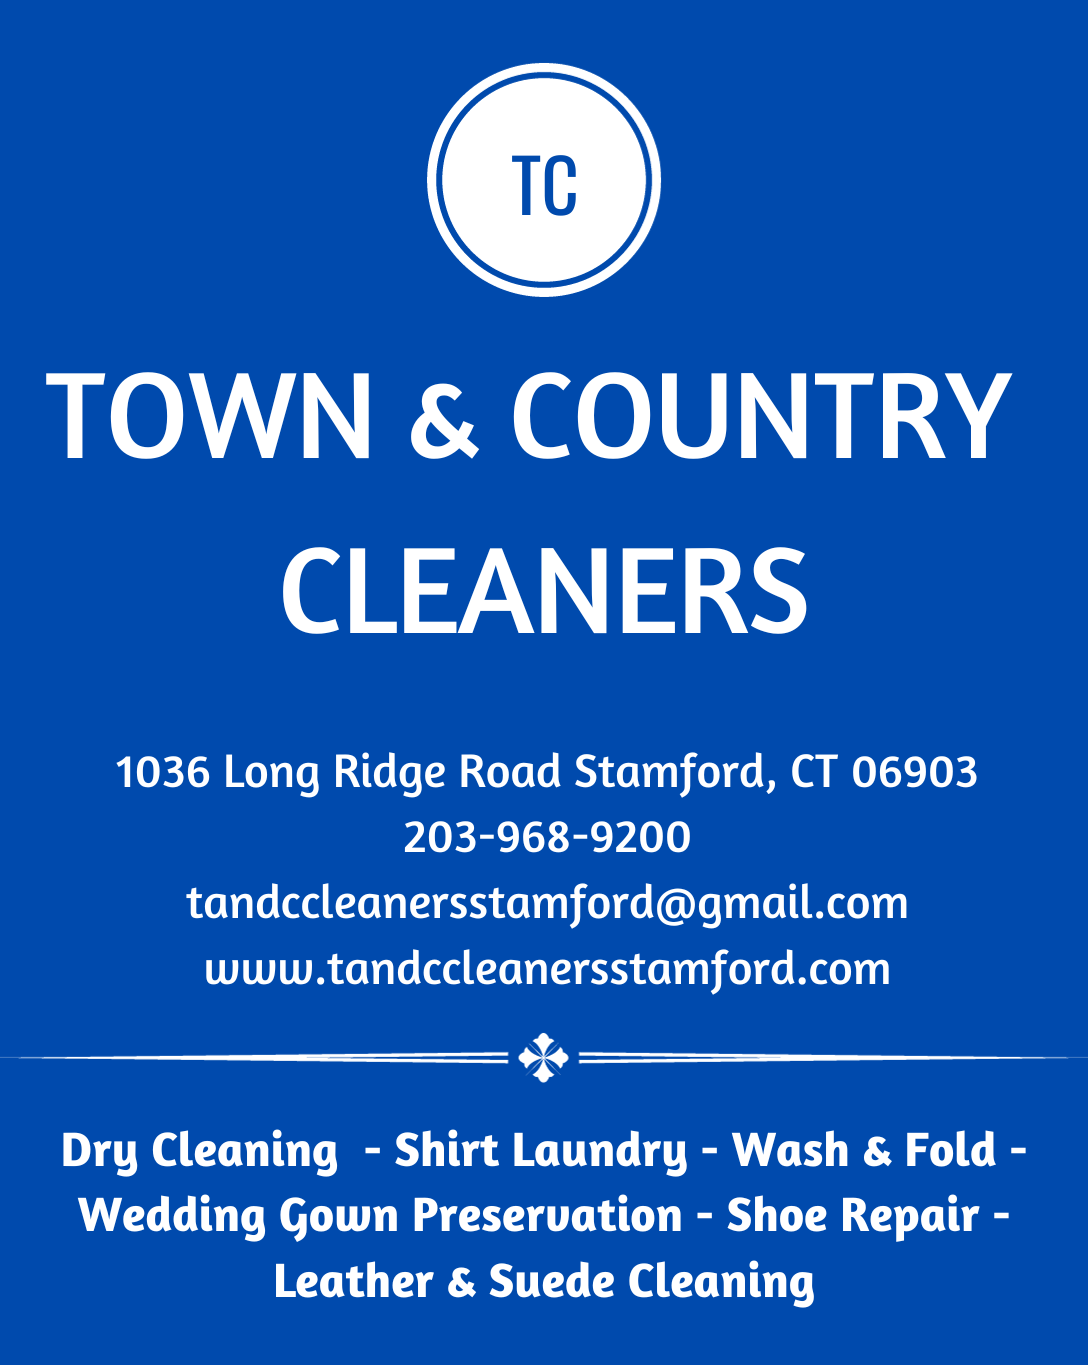 Town & Counry Cleaners